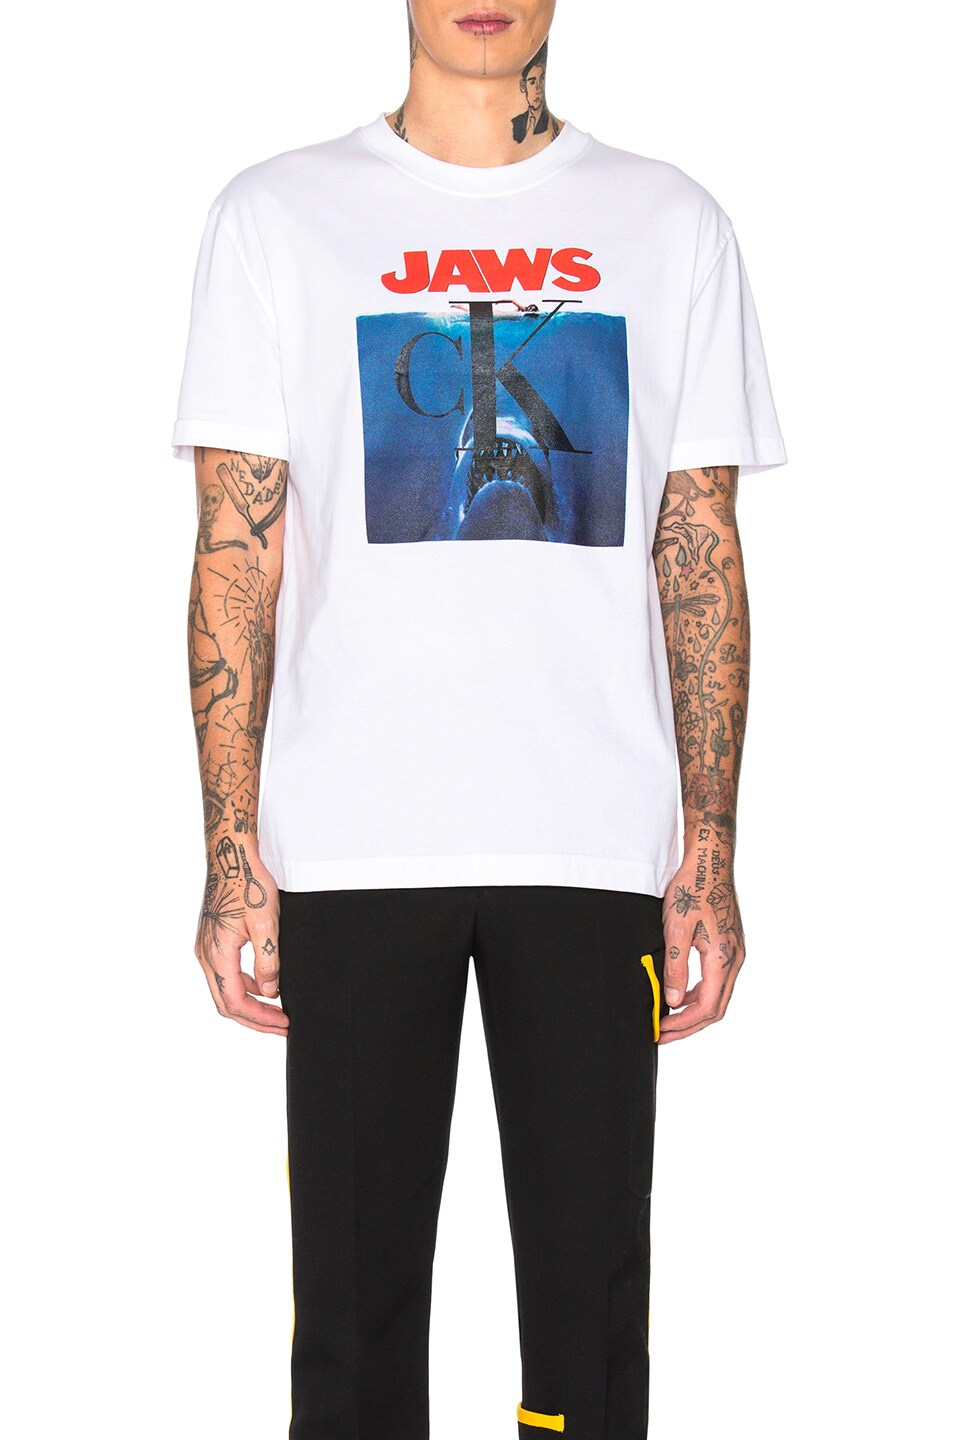 Image 1 of CALVIN KLEIN 205W39NYC Jaws 1975 Graphic Tee in Optic White